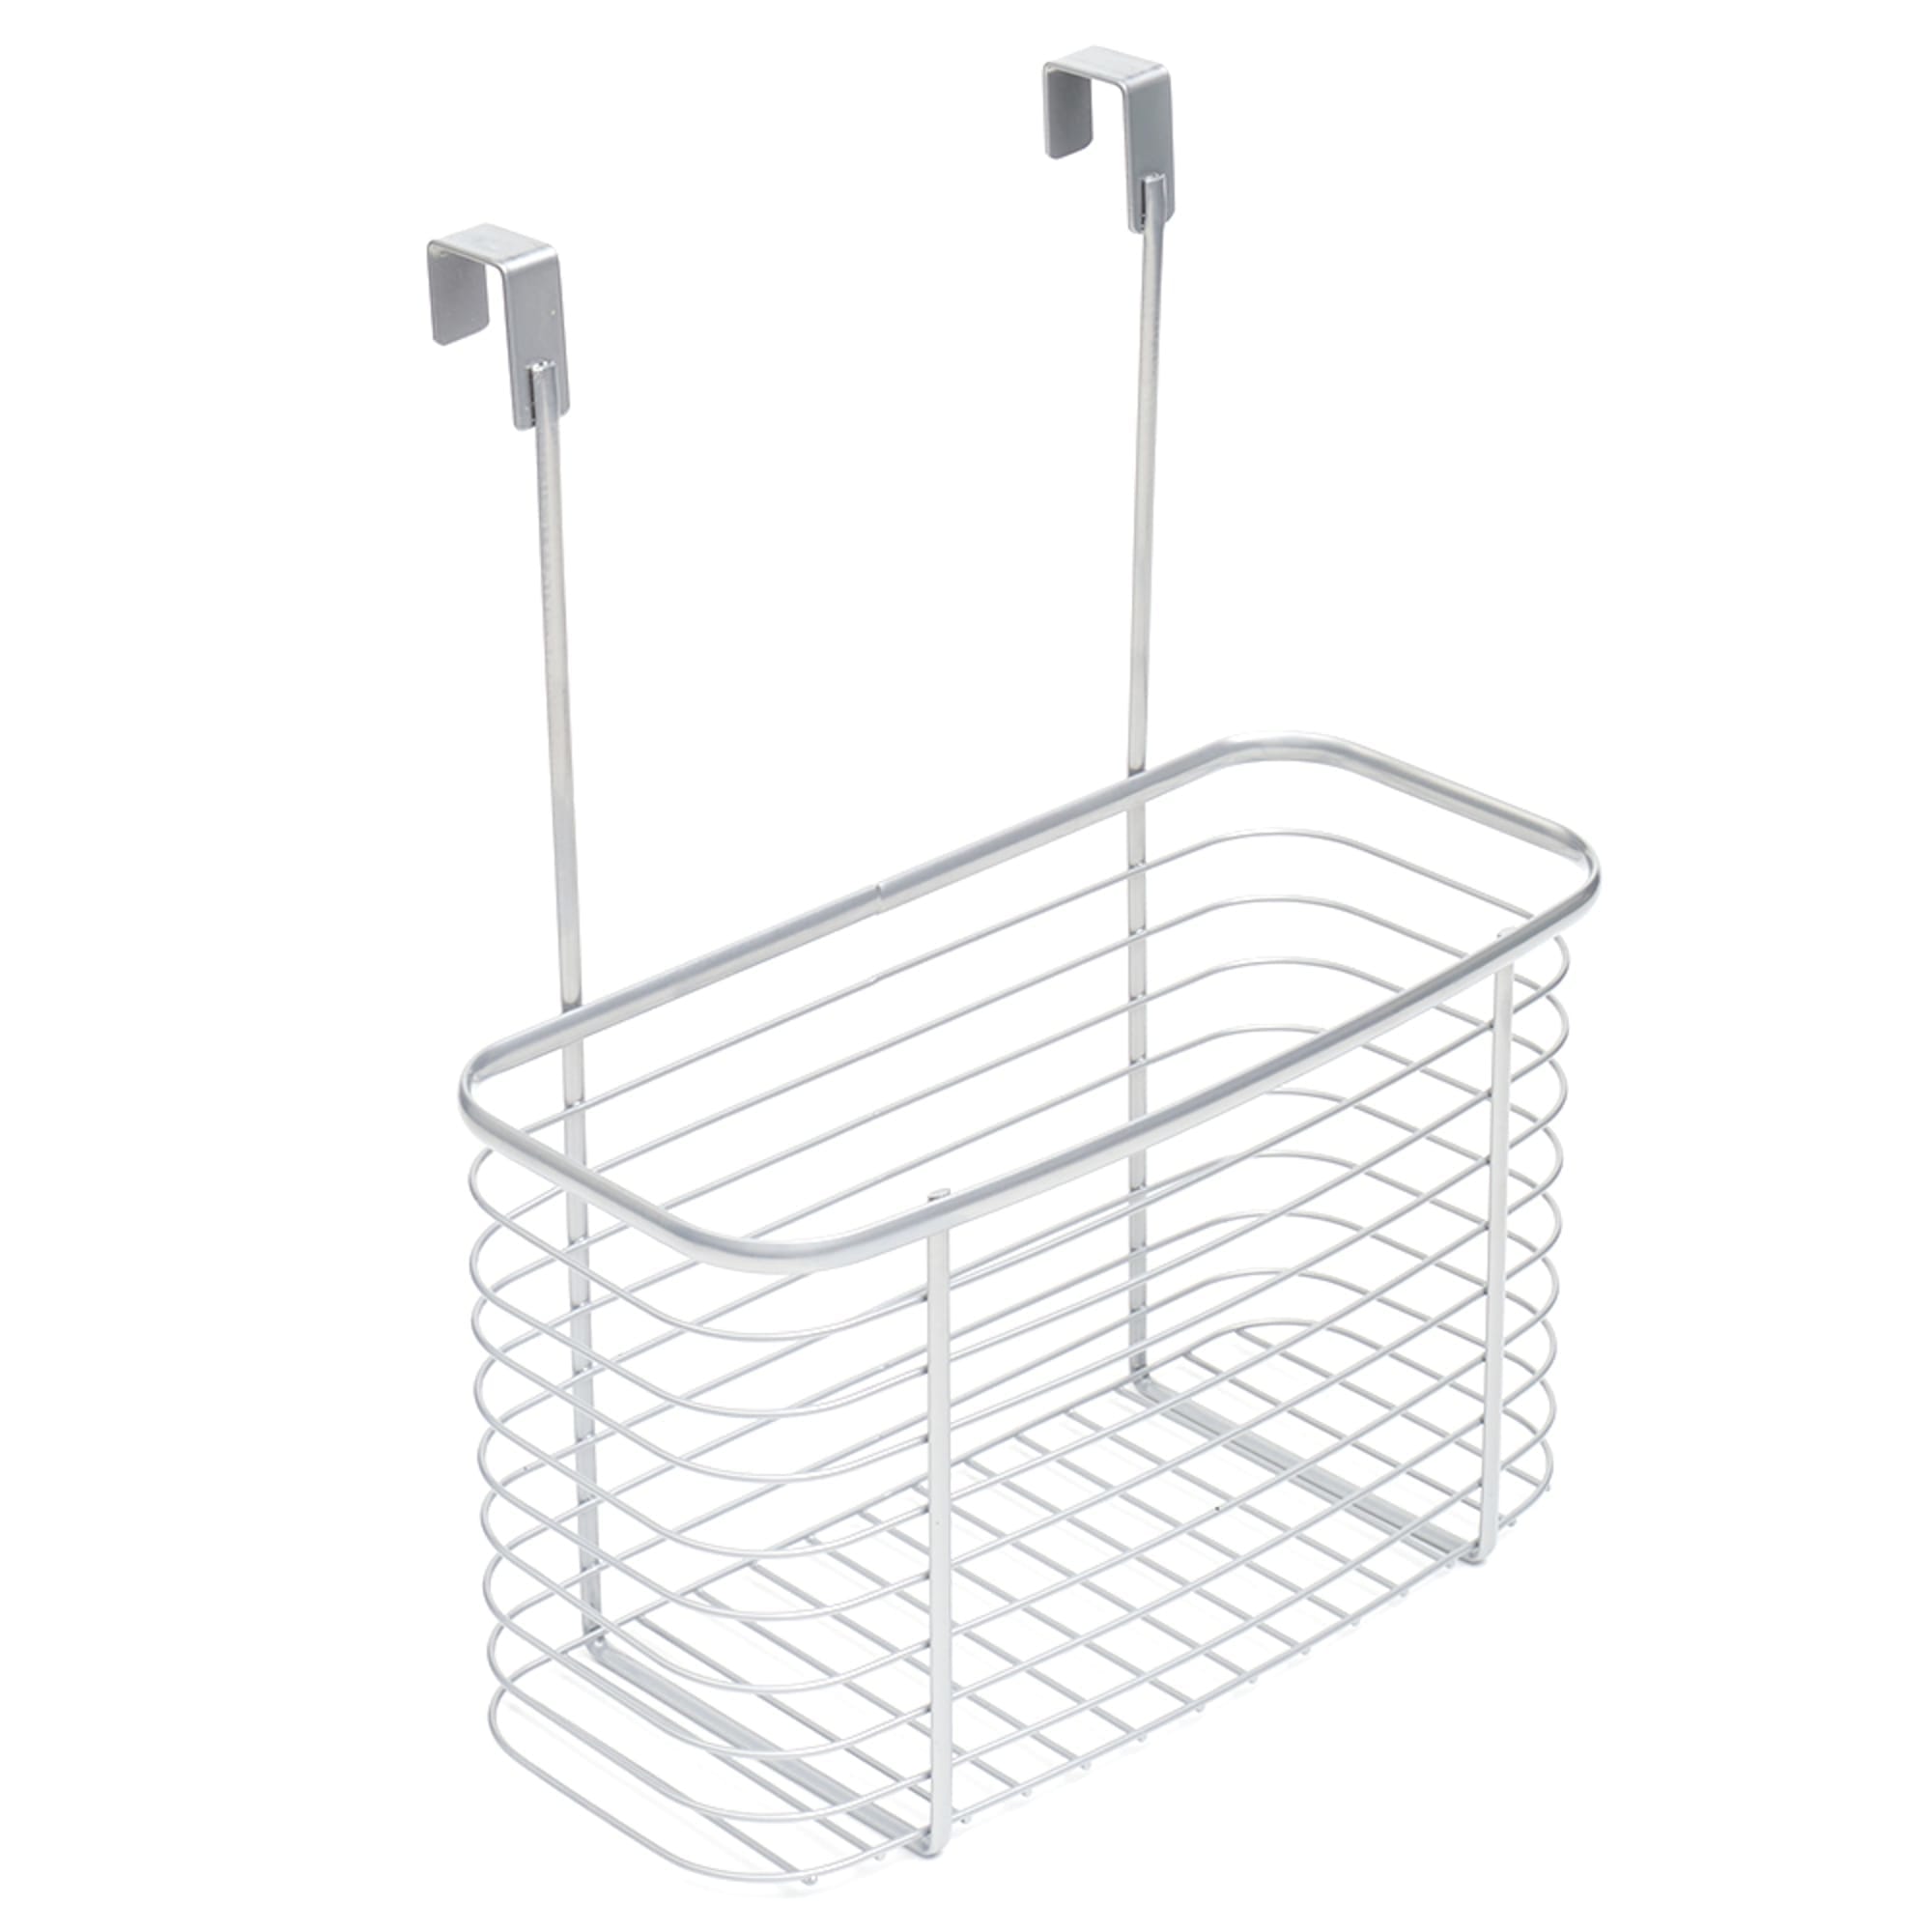 Home Basics Large Steel Over the Cabinet Basket, Silver $8.00 EACH, CASE PACK OF 12